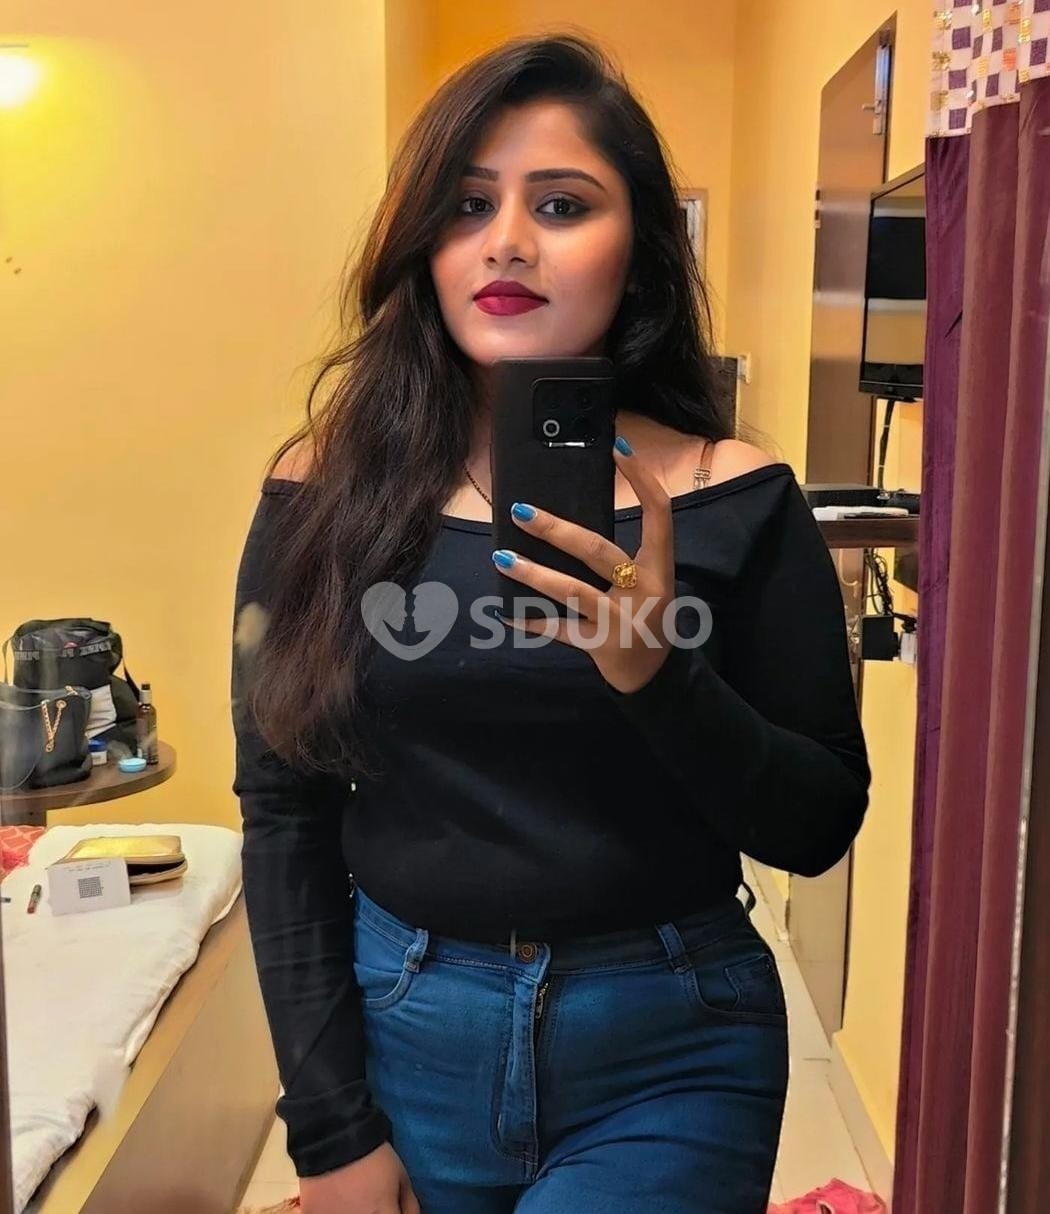 KAVYA TAMBARAM JUICY ADULT CLASSIFIED FIND HOT &HORNY STUFF NEAR YOU OUTCALL INCALL AFFORDABLE PRICE WHATSAPP 95710-8197